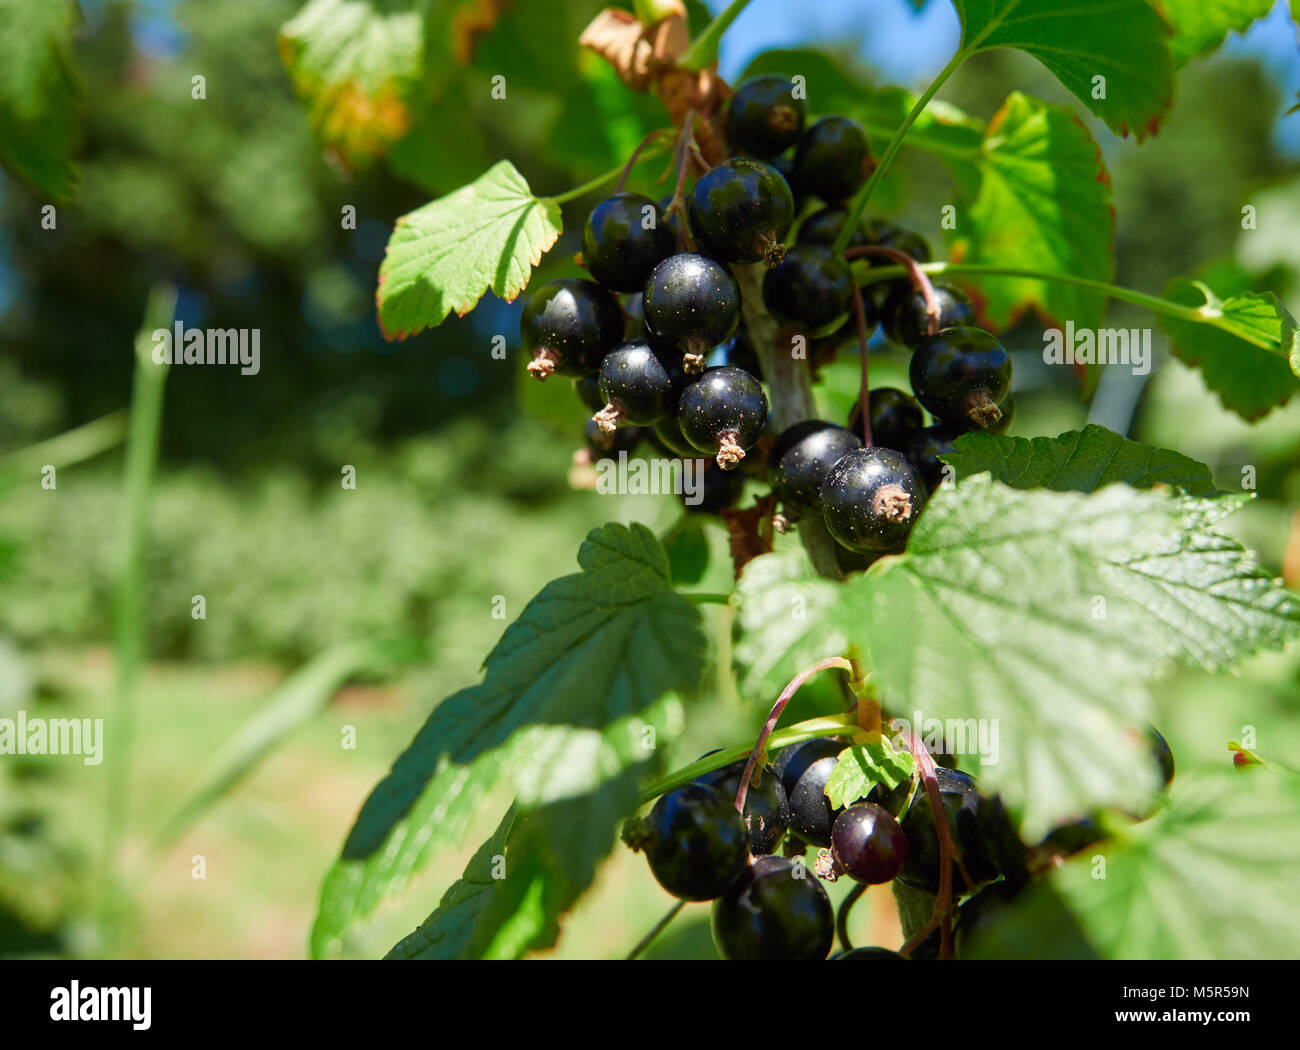 Blackcurrants growing on blackcurrant bushes in a pick your own fruit farm in the English countryside, UK. Stock Photo